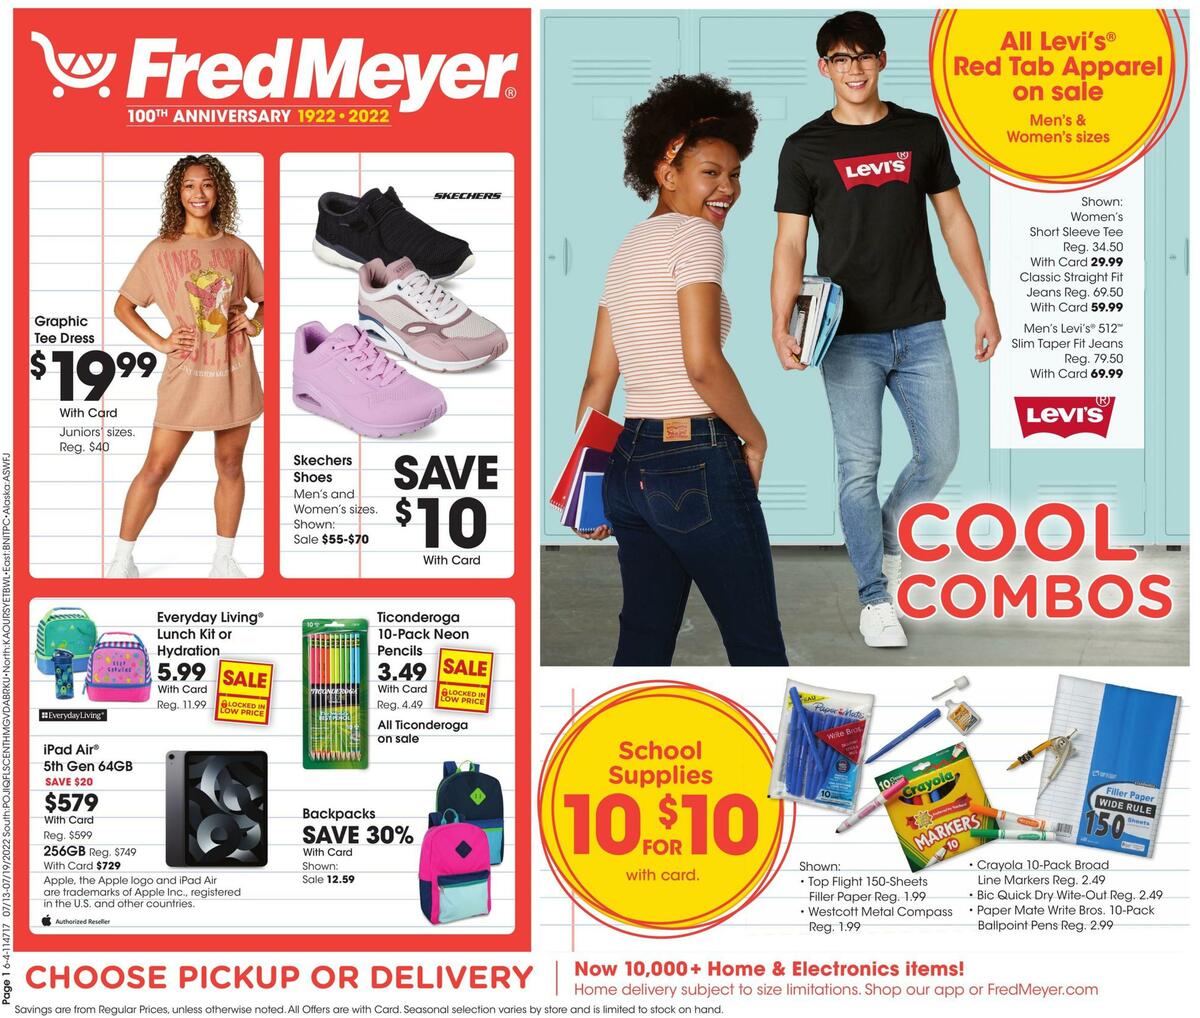 Fred Meyer General Merchandise Weekly Ad & Specials from July 13